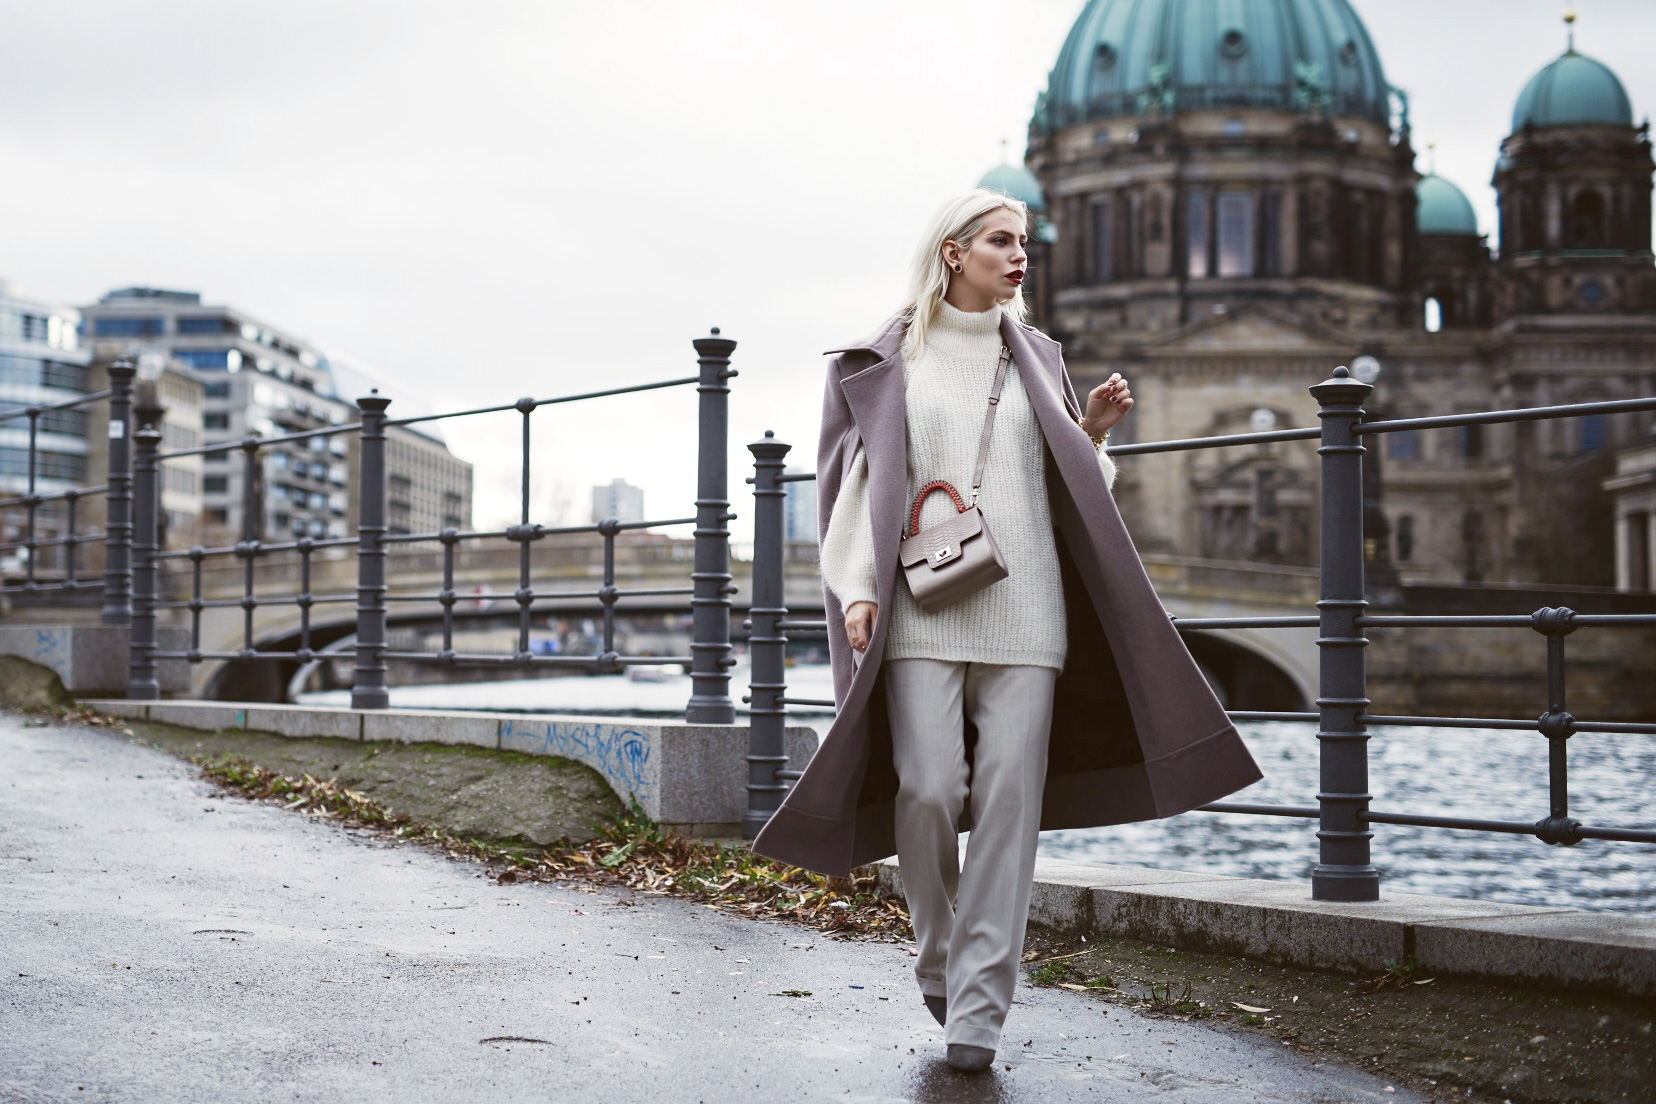 view more details on my blog | outfit | bad weather in Berlin | featuring Dimitri, Cos, Lili Radu, Gestuz, | comfy, classy, elegant, creamy pastel outfit